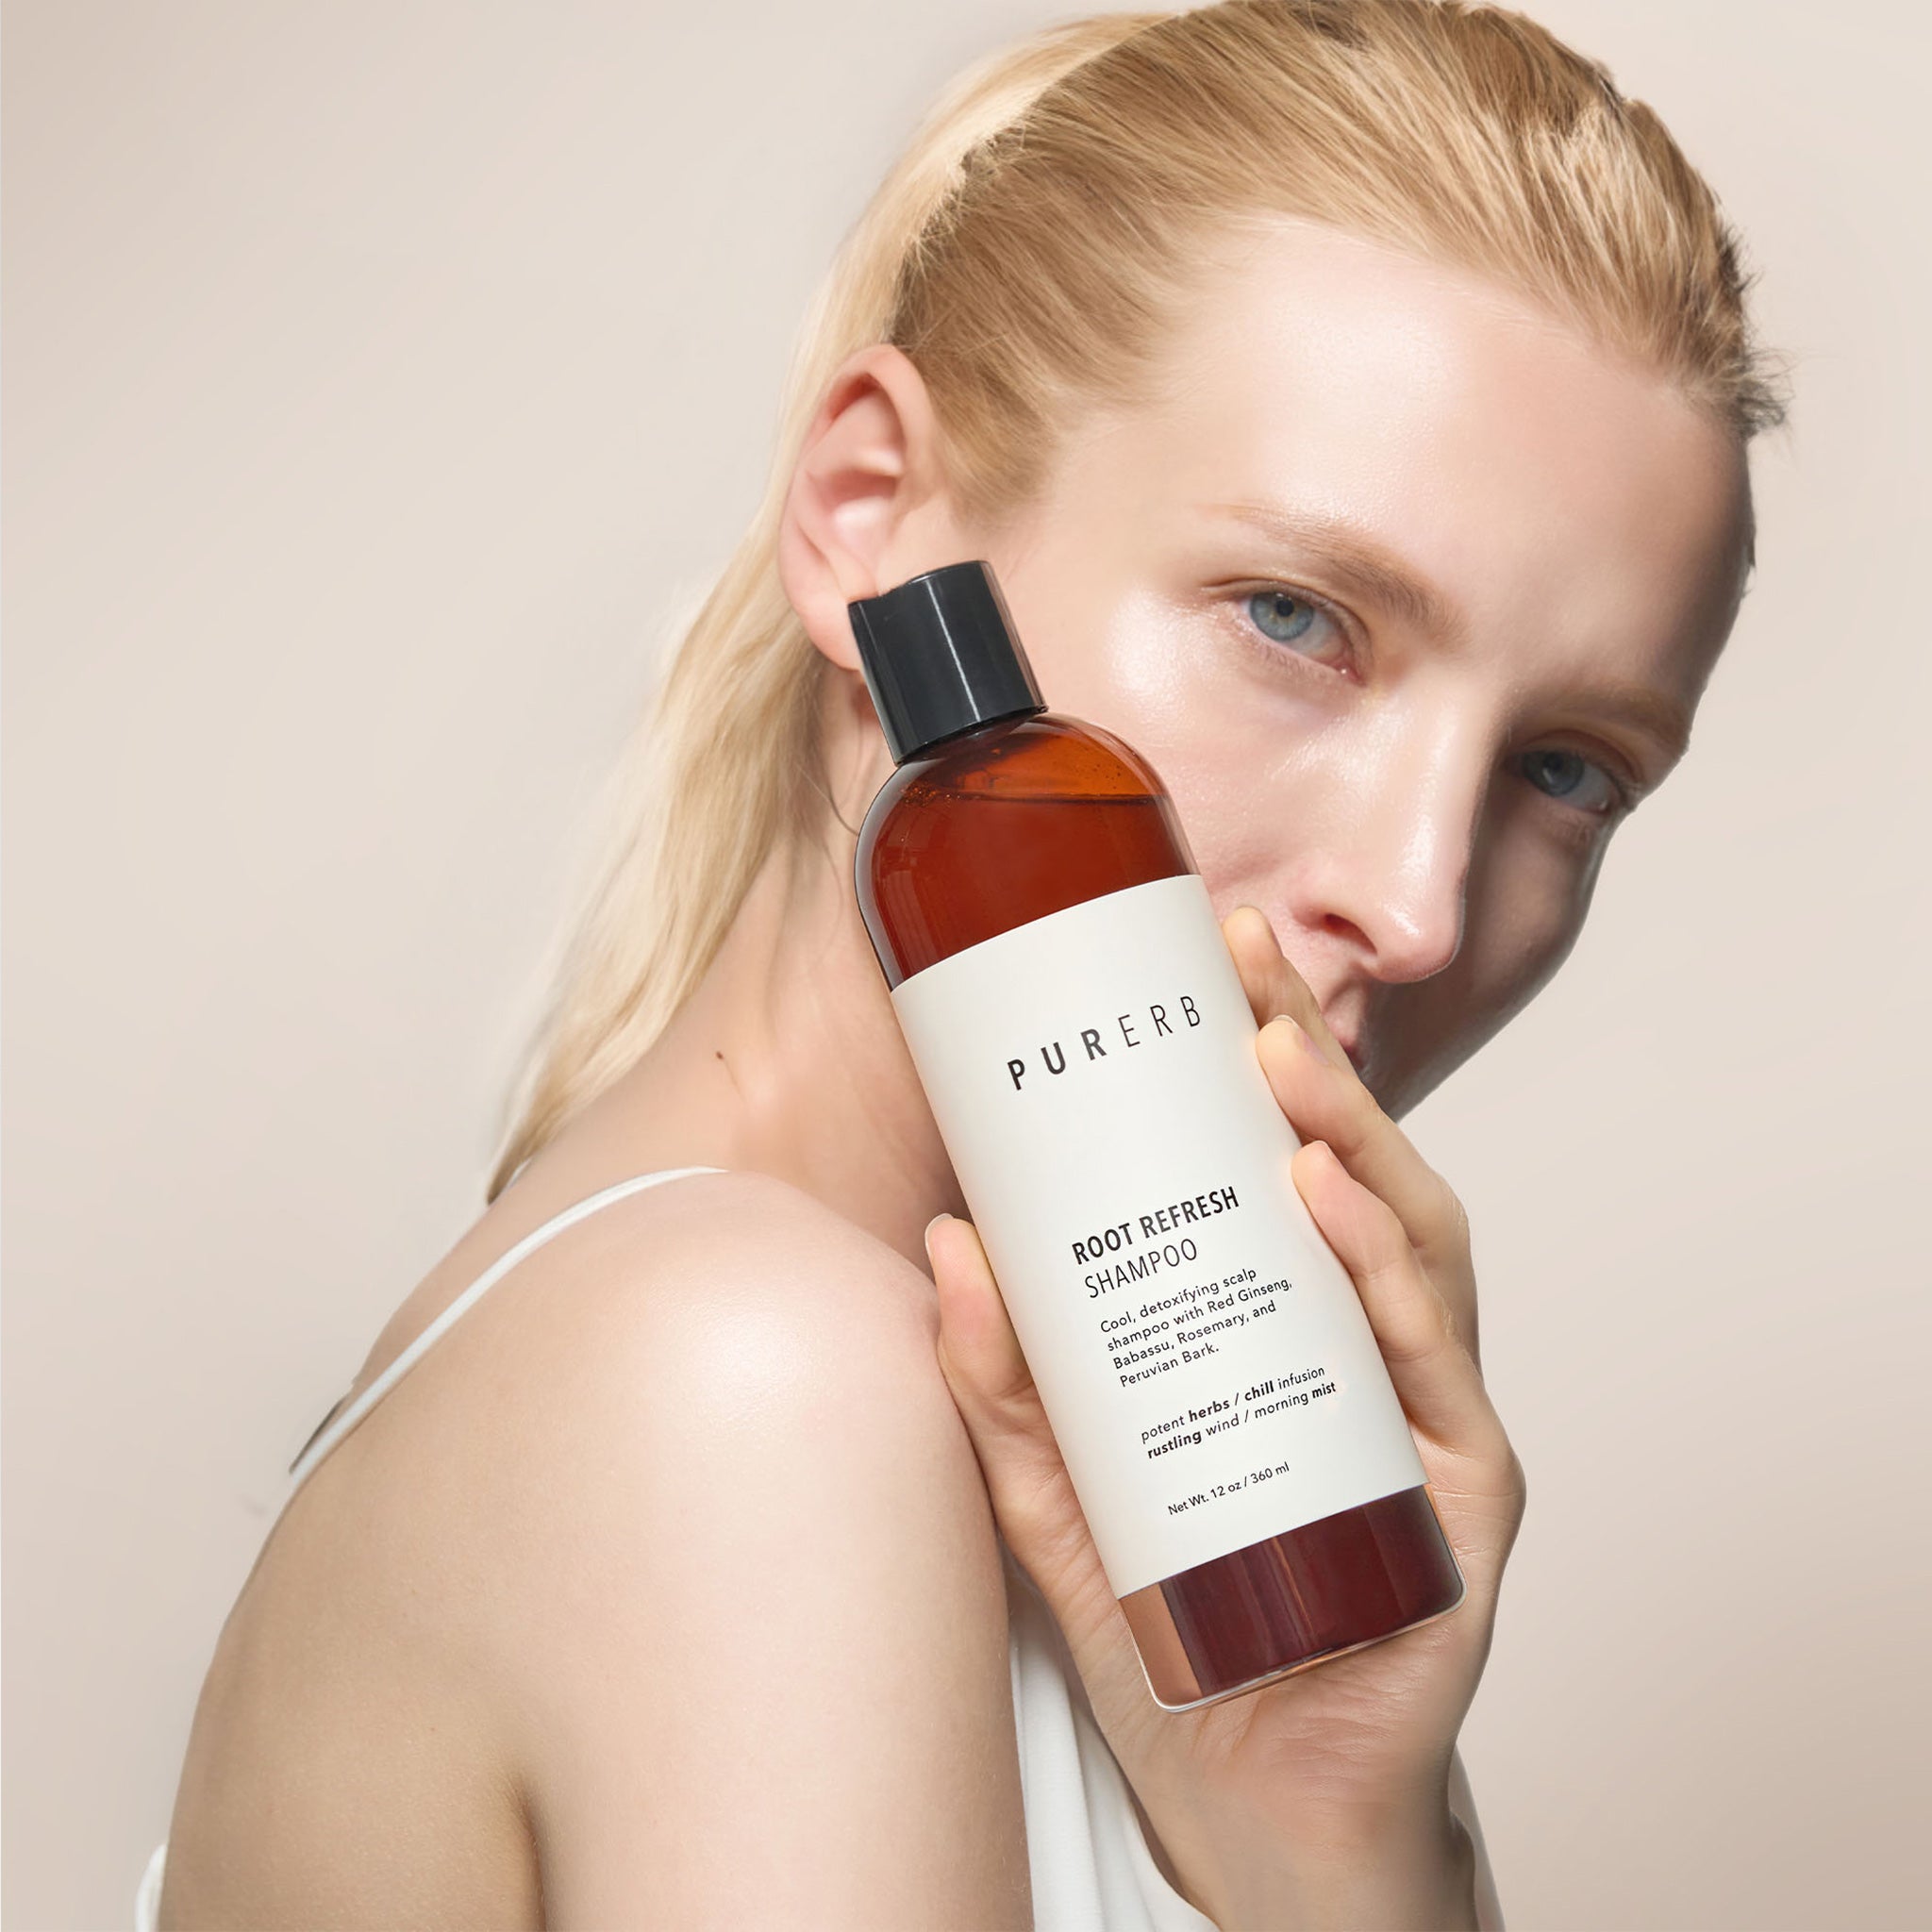 Root Refresh Shampoo bottle – A revitalizing solution for frizz-free, silky hair. This shampoo detoxifies and nourishes oily roots and tired strands with hydrating oils and botanical extracts, offering a refreshing and hair-fortifying experience with an amazing scent.